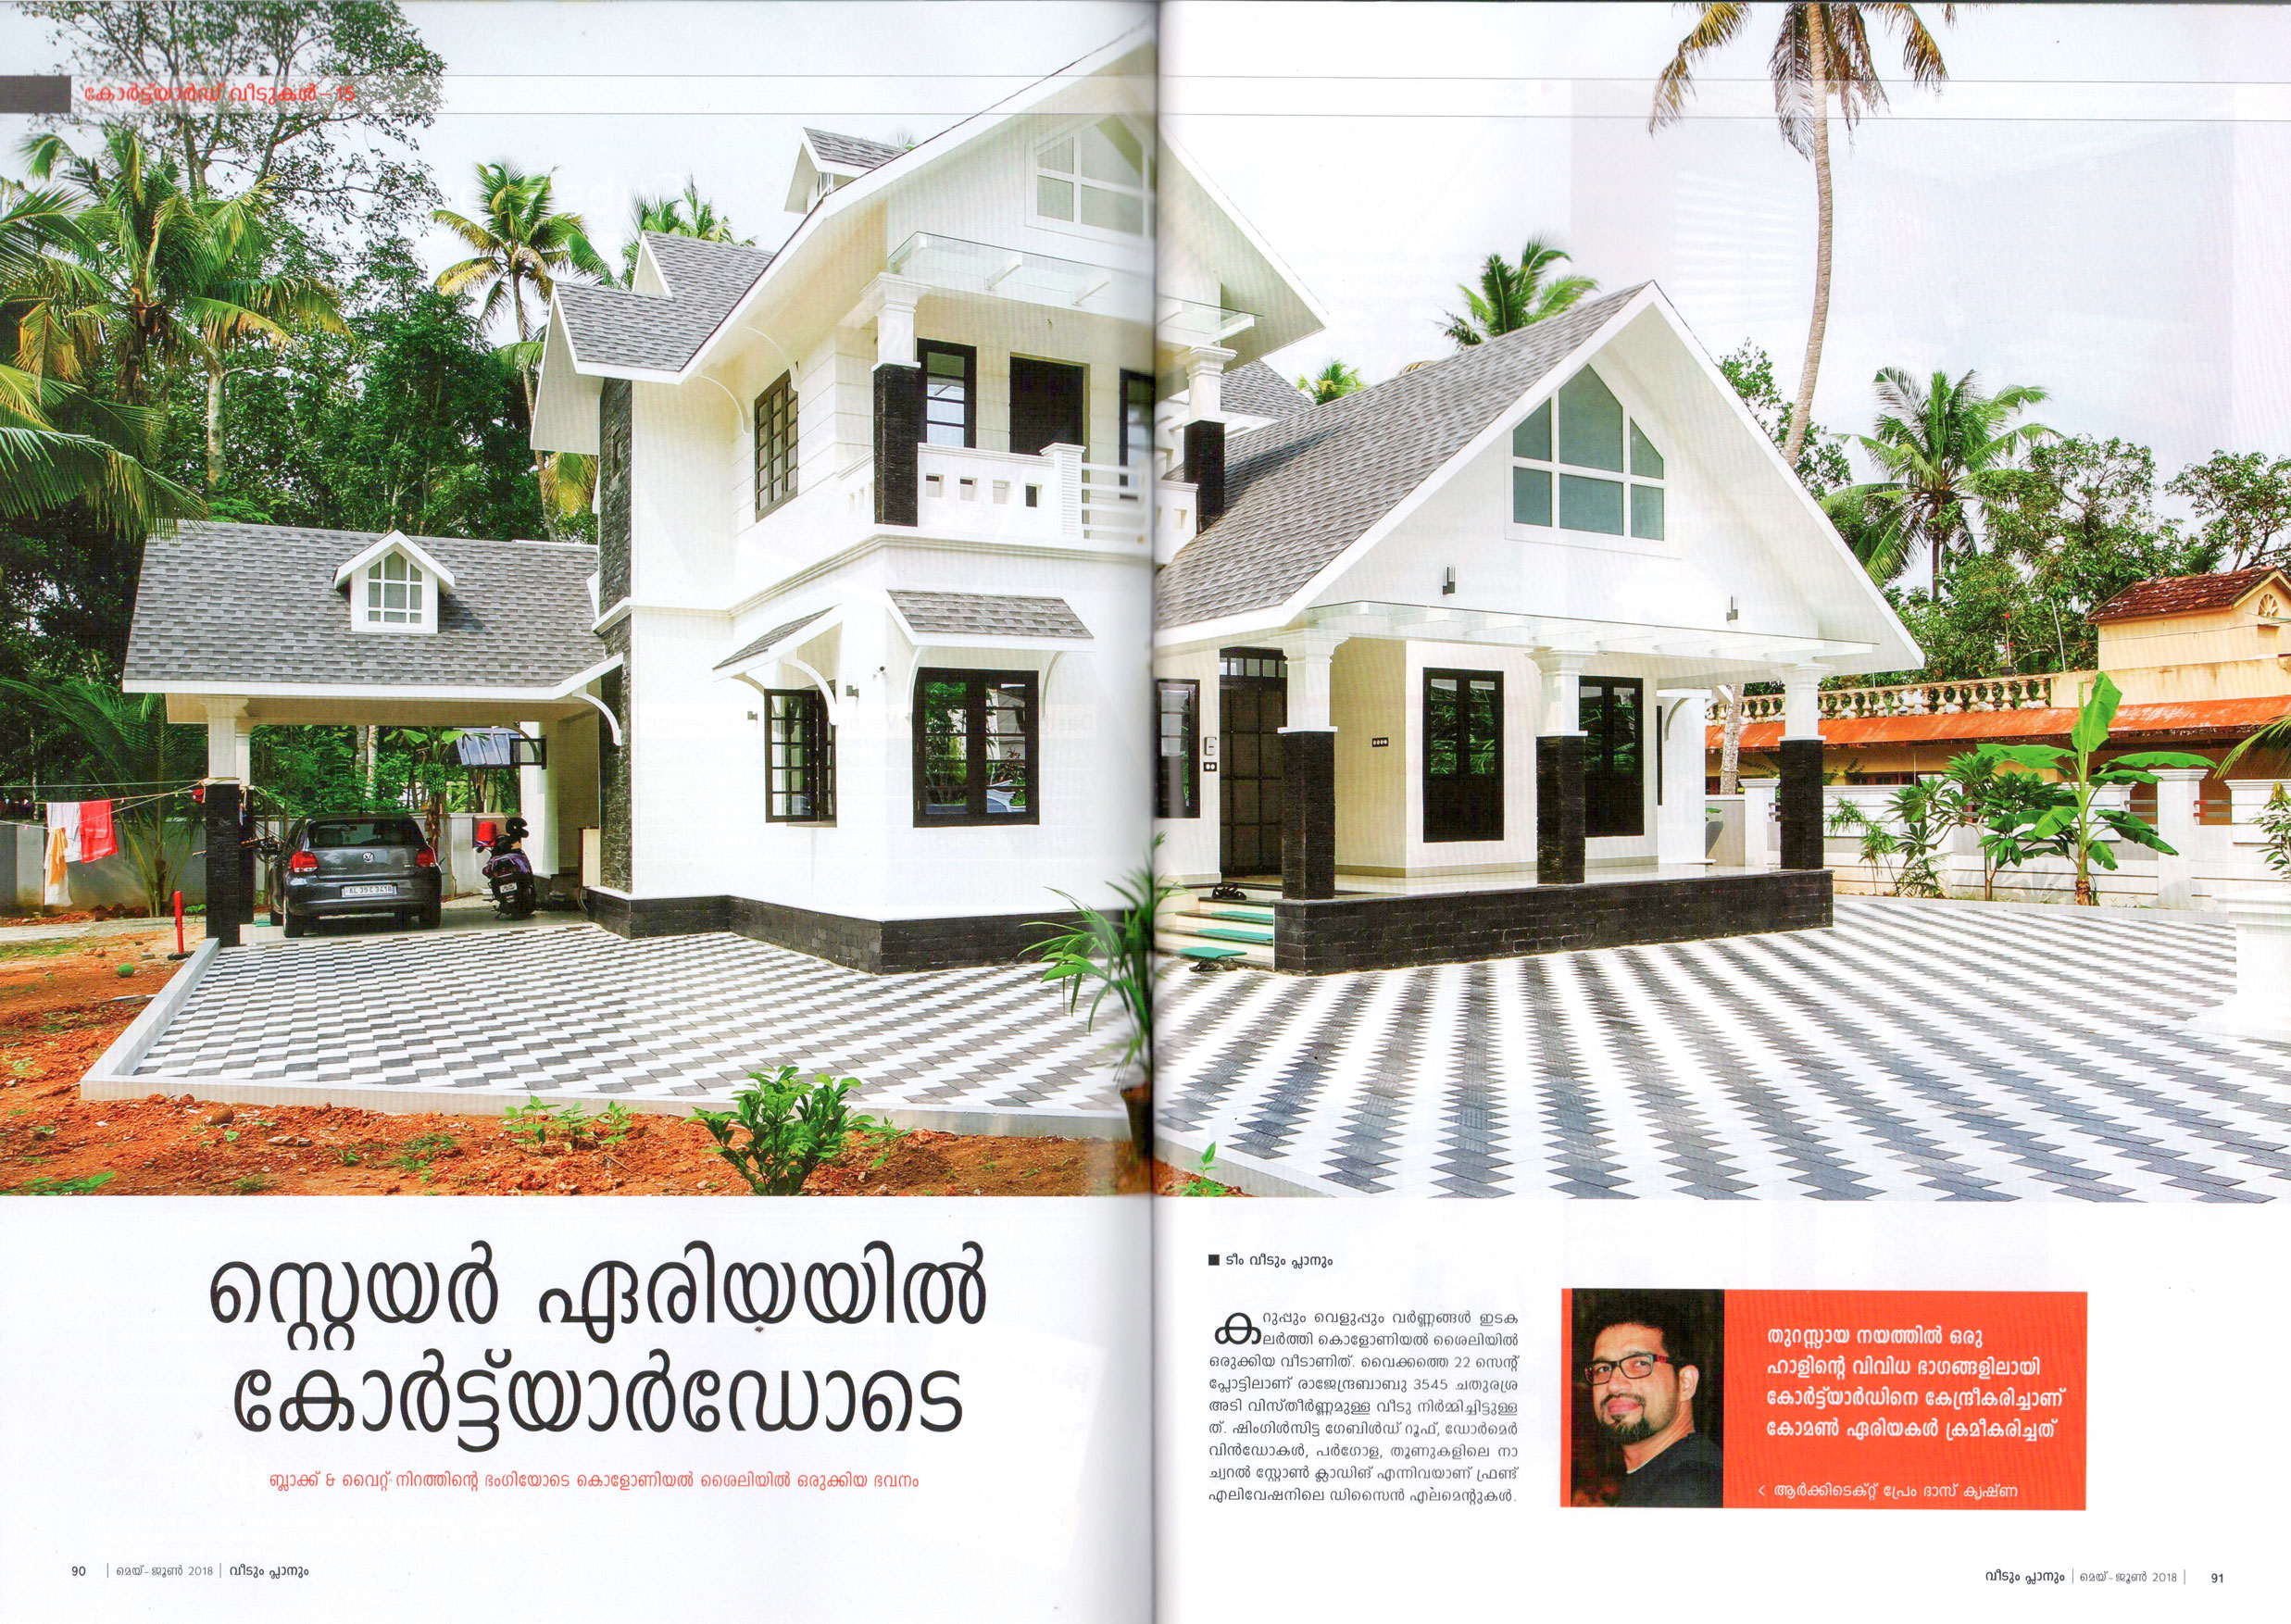 Top Architects and interiors in kerala